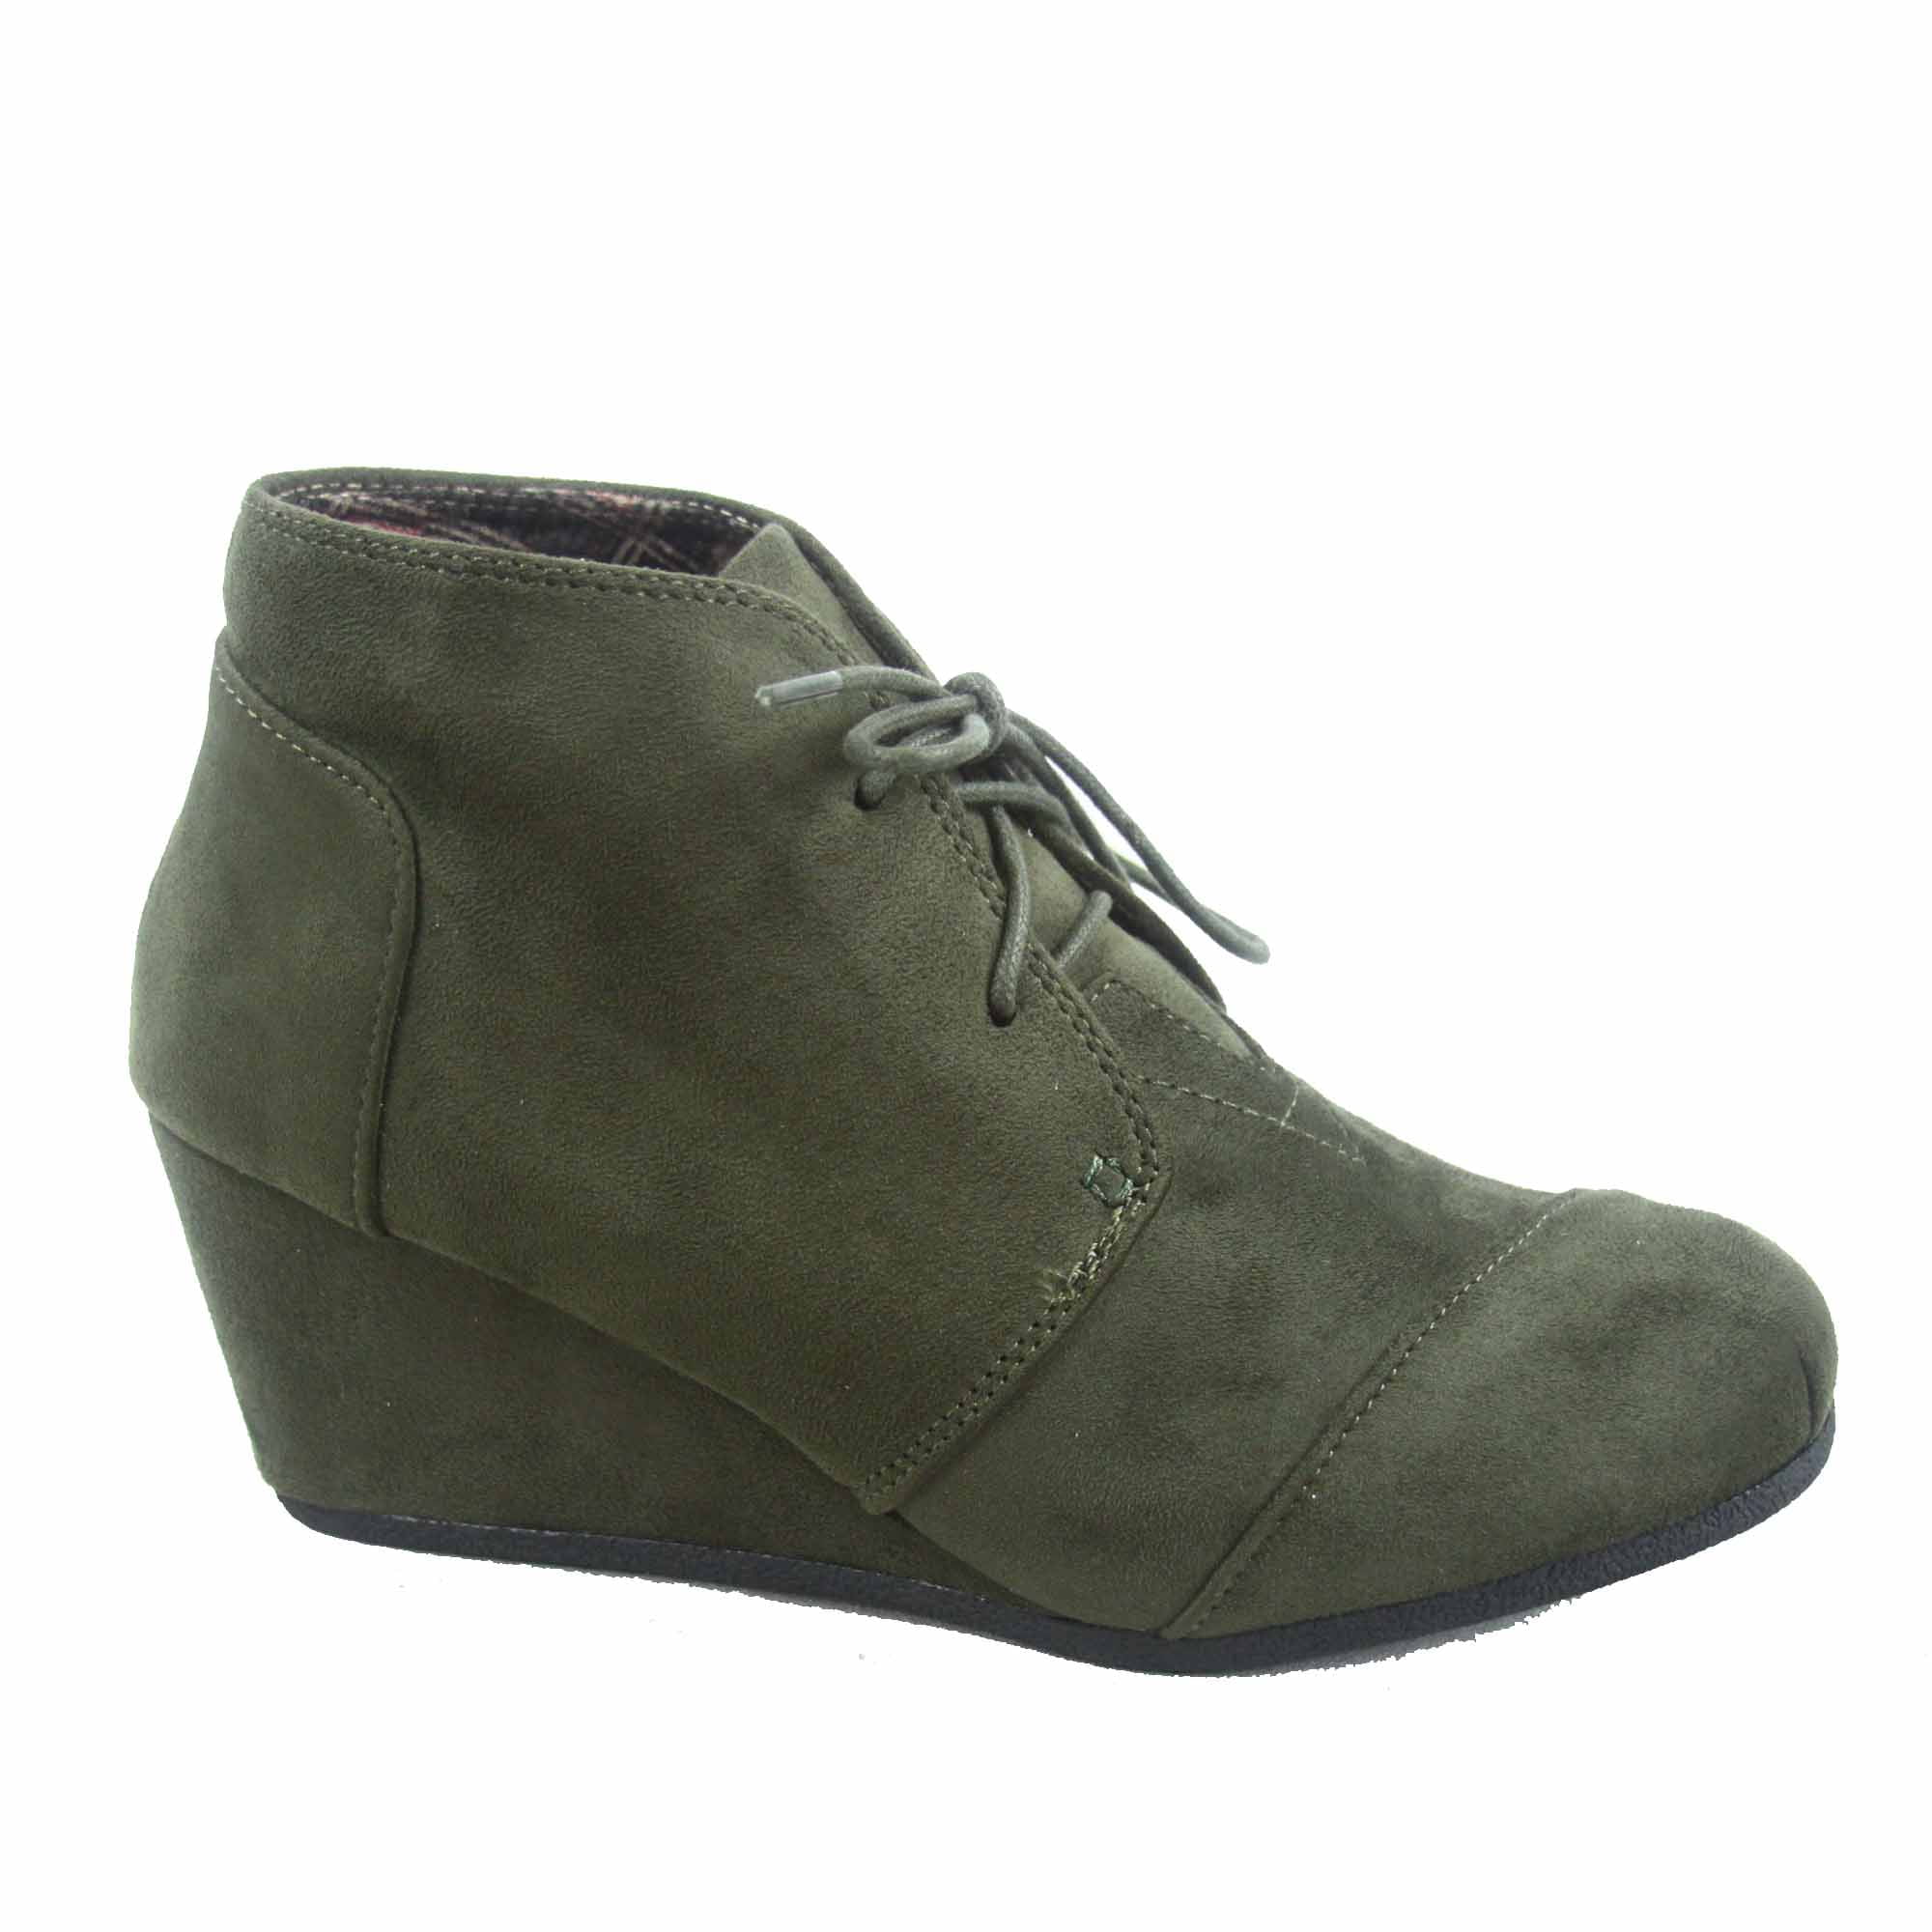 Patricia-1 Women's Casual Oxford Ankle Booties Lace up Low Wedge Shoes ...